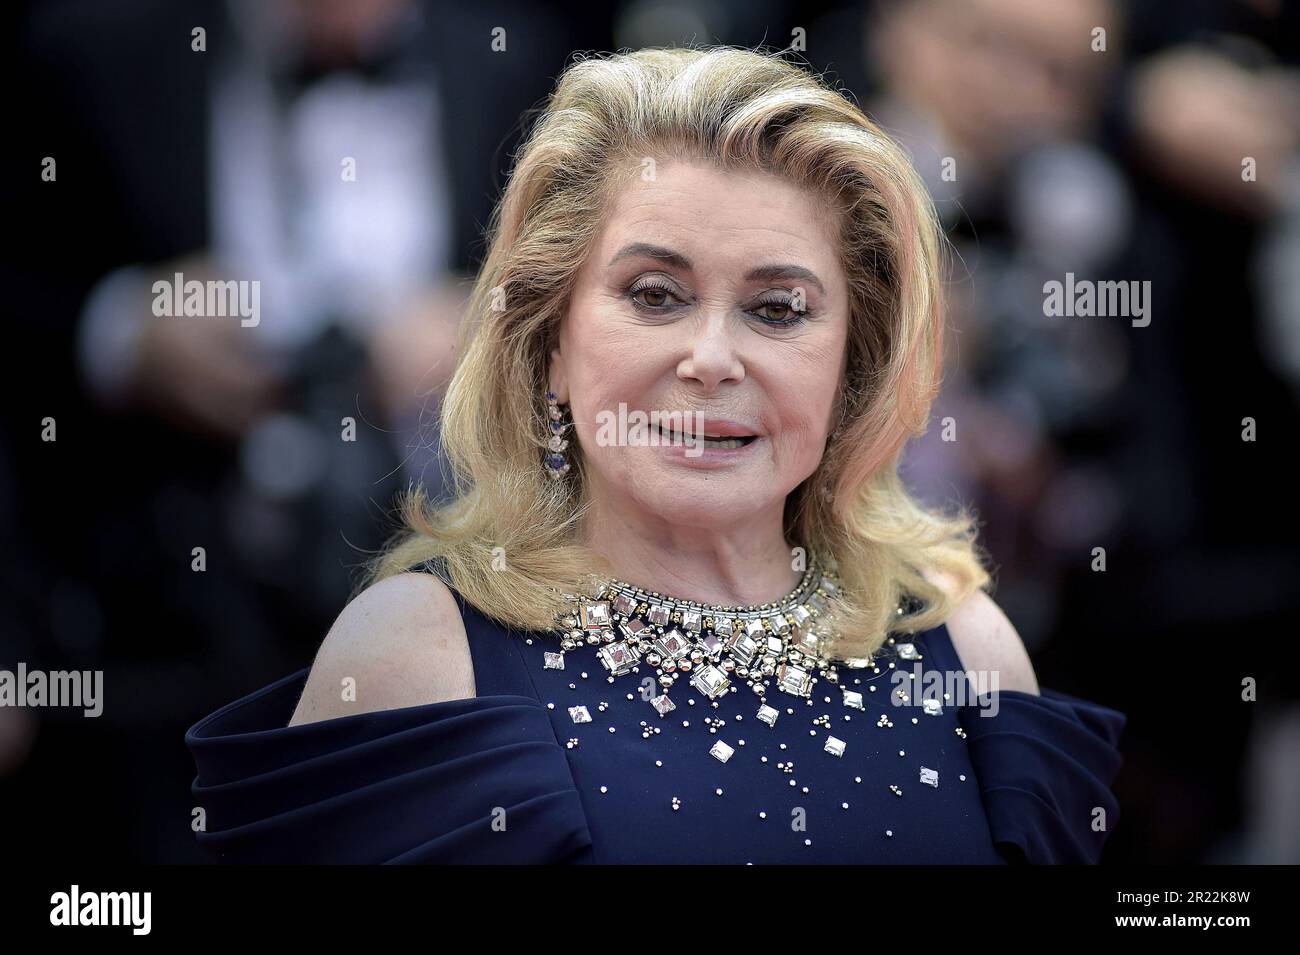 Cannes, France. 16th May, 2023. Catherine Deneuve attends the Opening Gala and premiere of Jeanne du Barry at the 76th Cannes Film Festival at Palais des Festivals in Cannes, France on Tuesday, May 16, 2023. Photo by Rocco Spaziani/ Credit: UPI/Alamy Live News Stock Photo